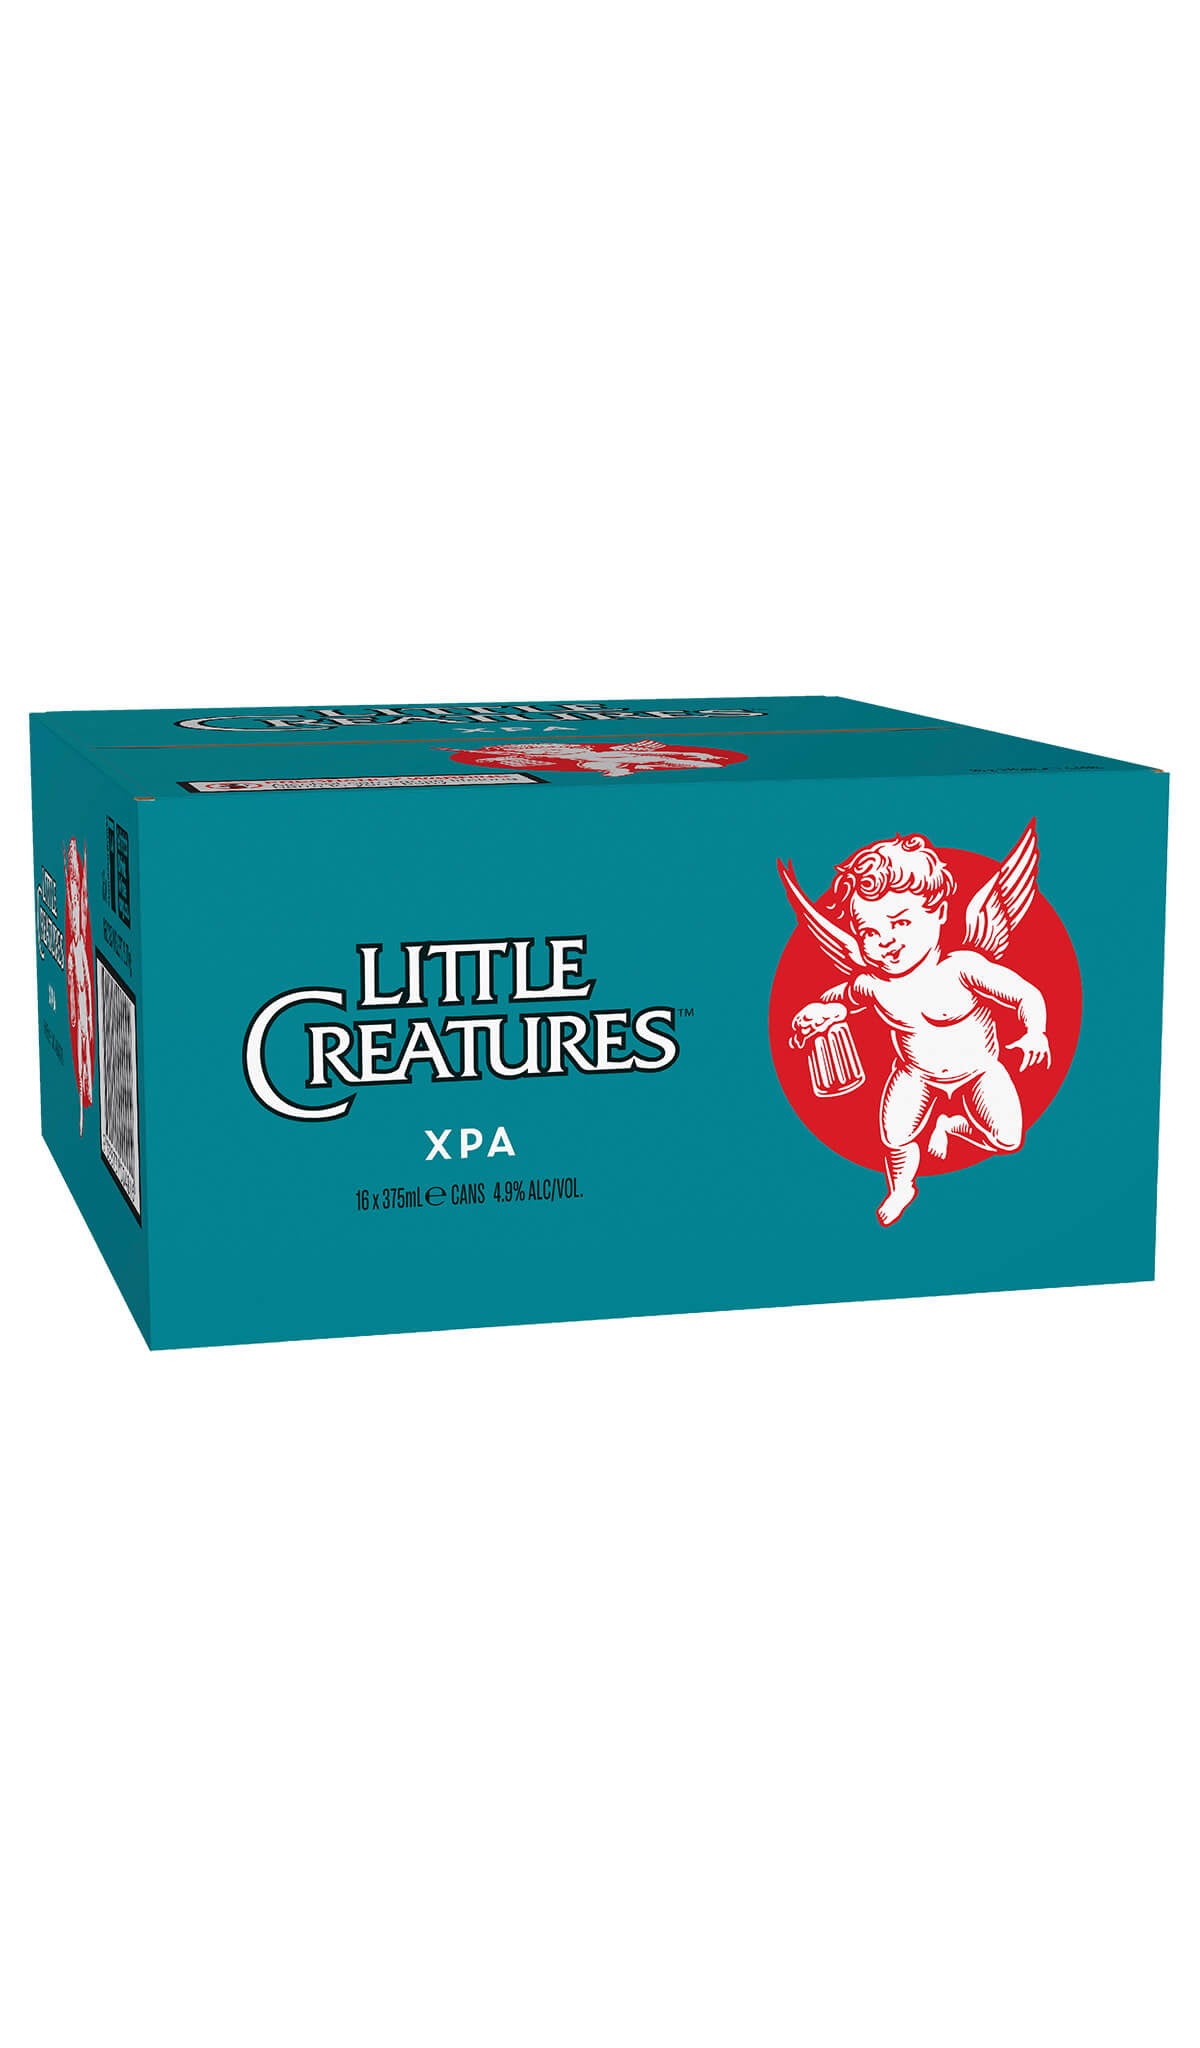 Find out more, explore the range and purchase Little Creatures XPA 16 x 375ml Can Slab Carton available online at Wine Sellers Direct - Australia's independent liquor specialists.